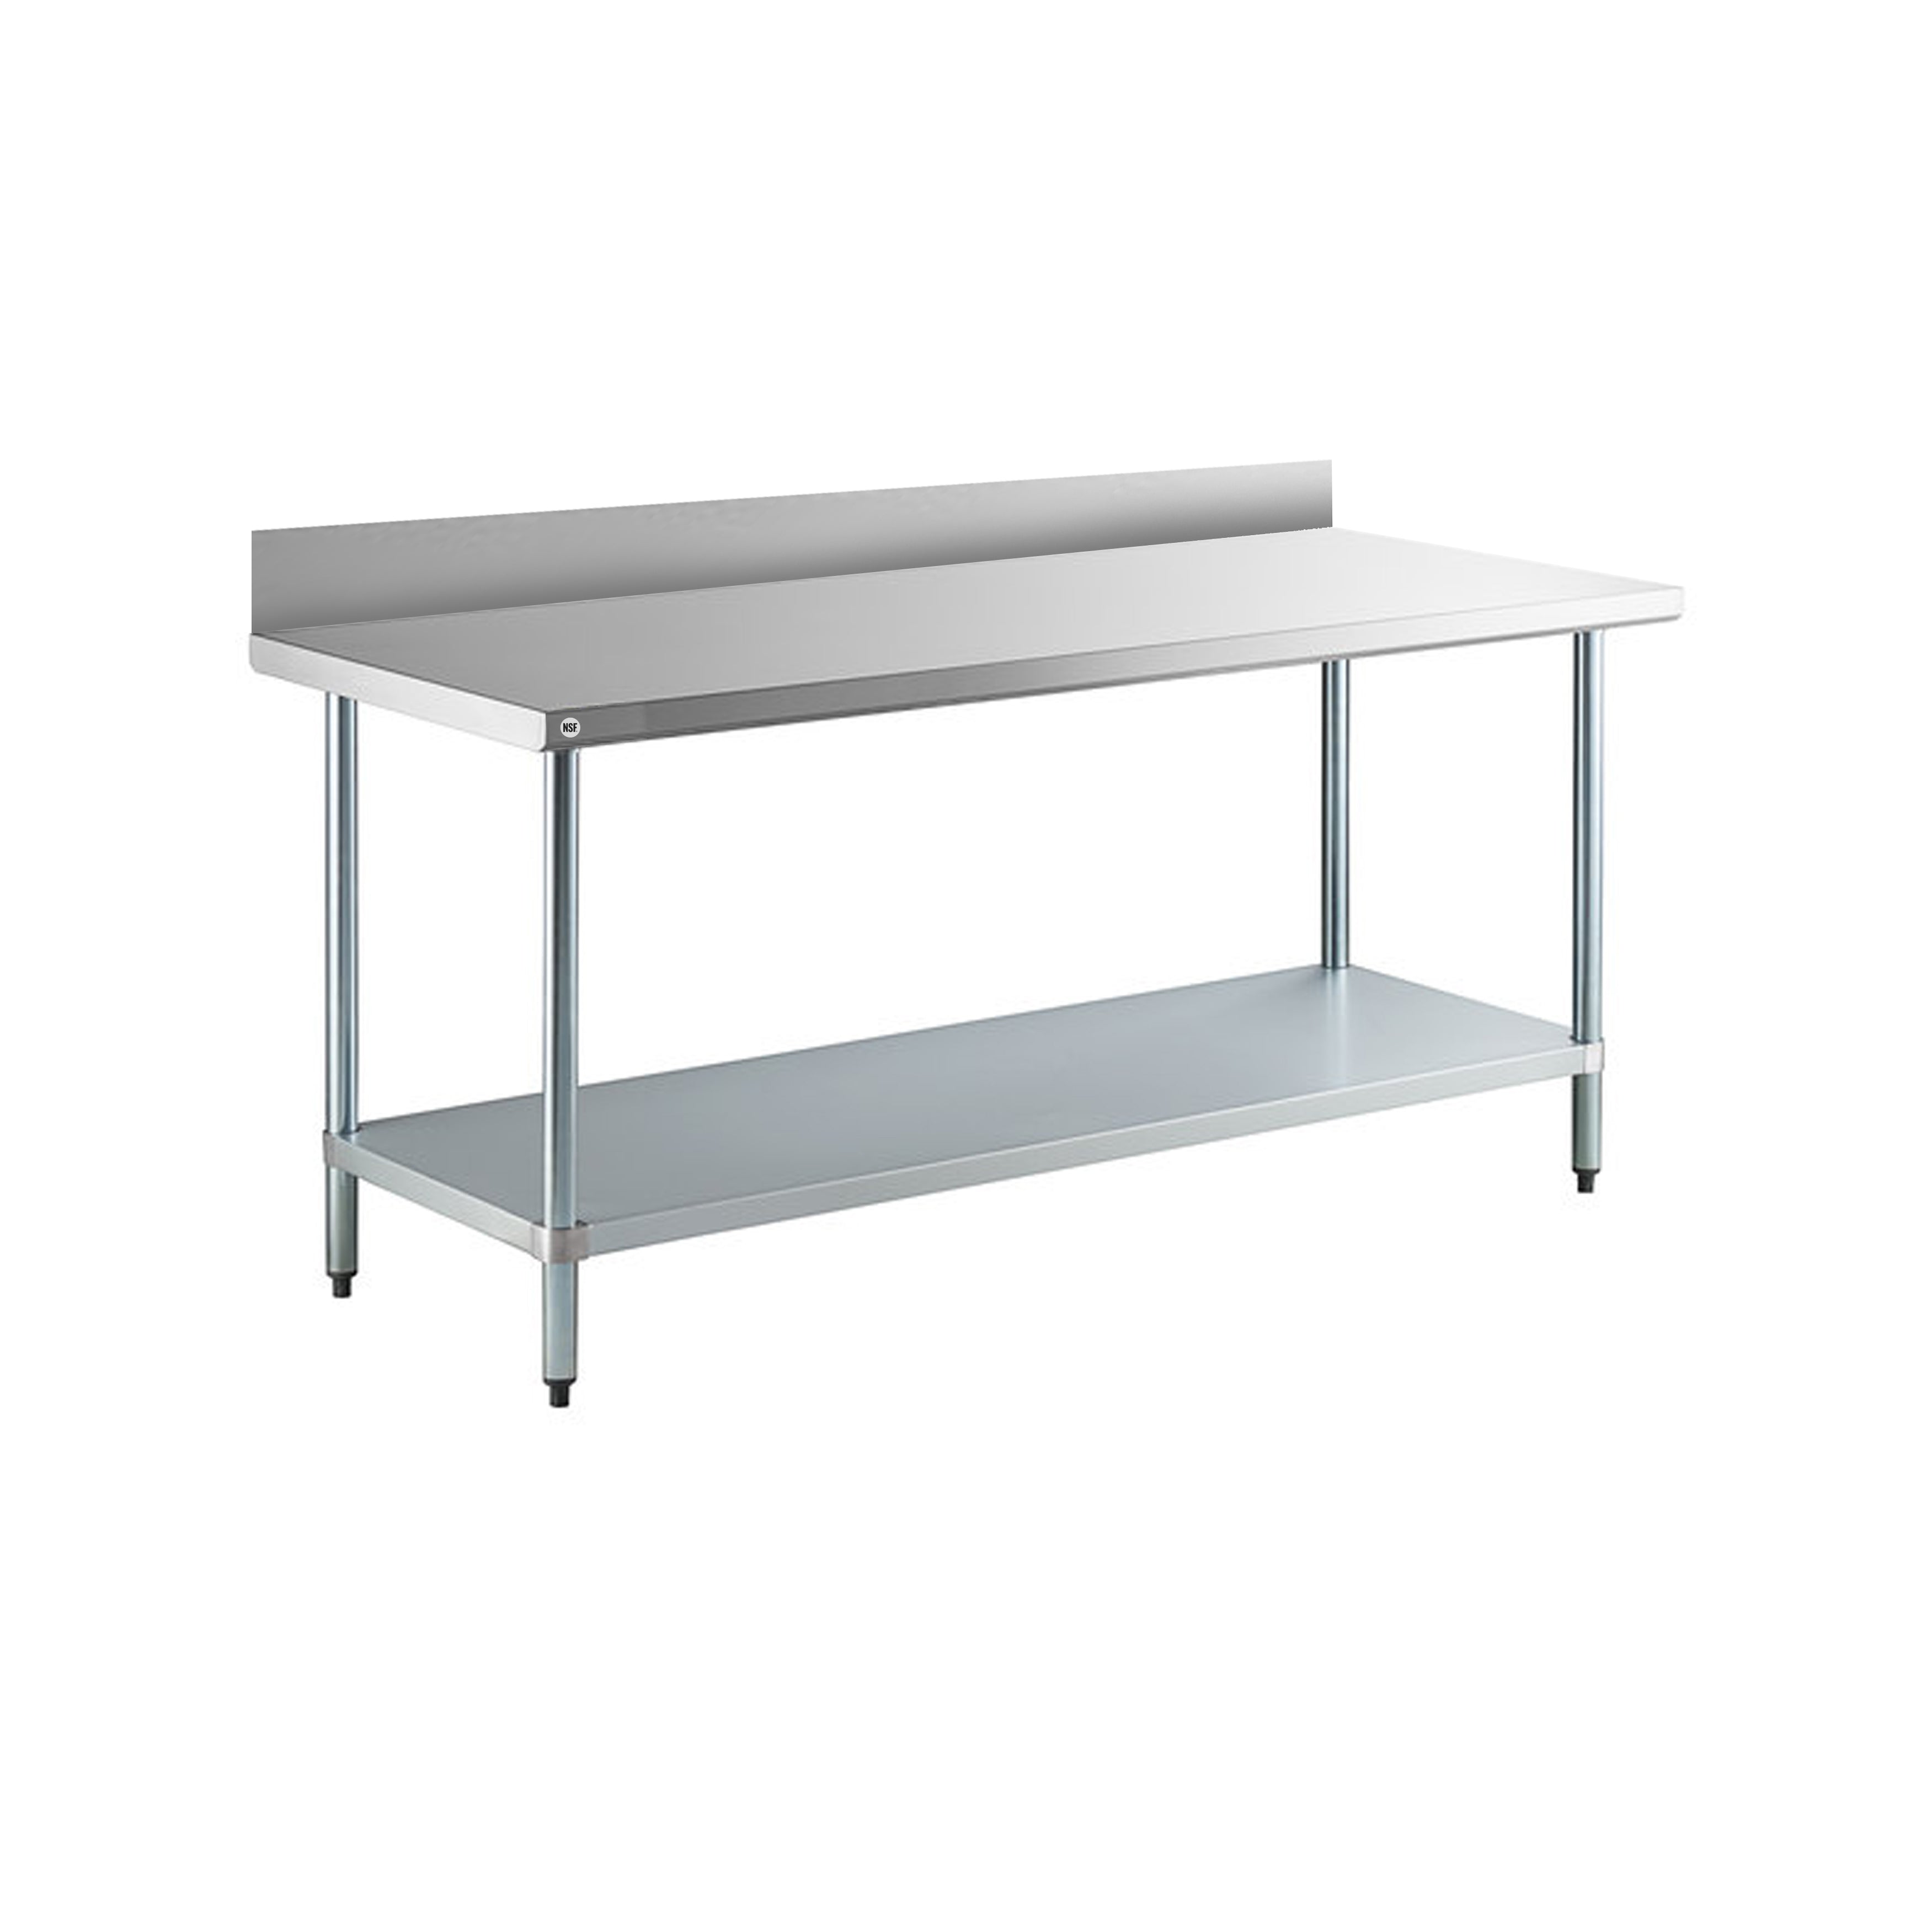 Omcan - 22078, Commercial 24" x 24" Stainless Steel Kitchen Work Table with 4" BackSplash 700lbs Light Duty